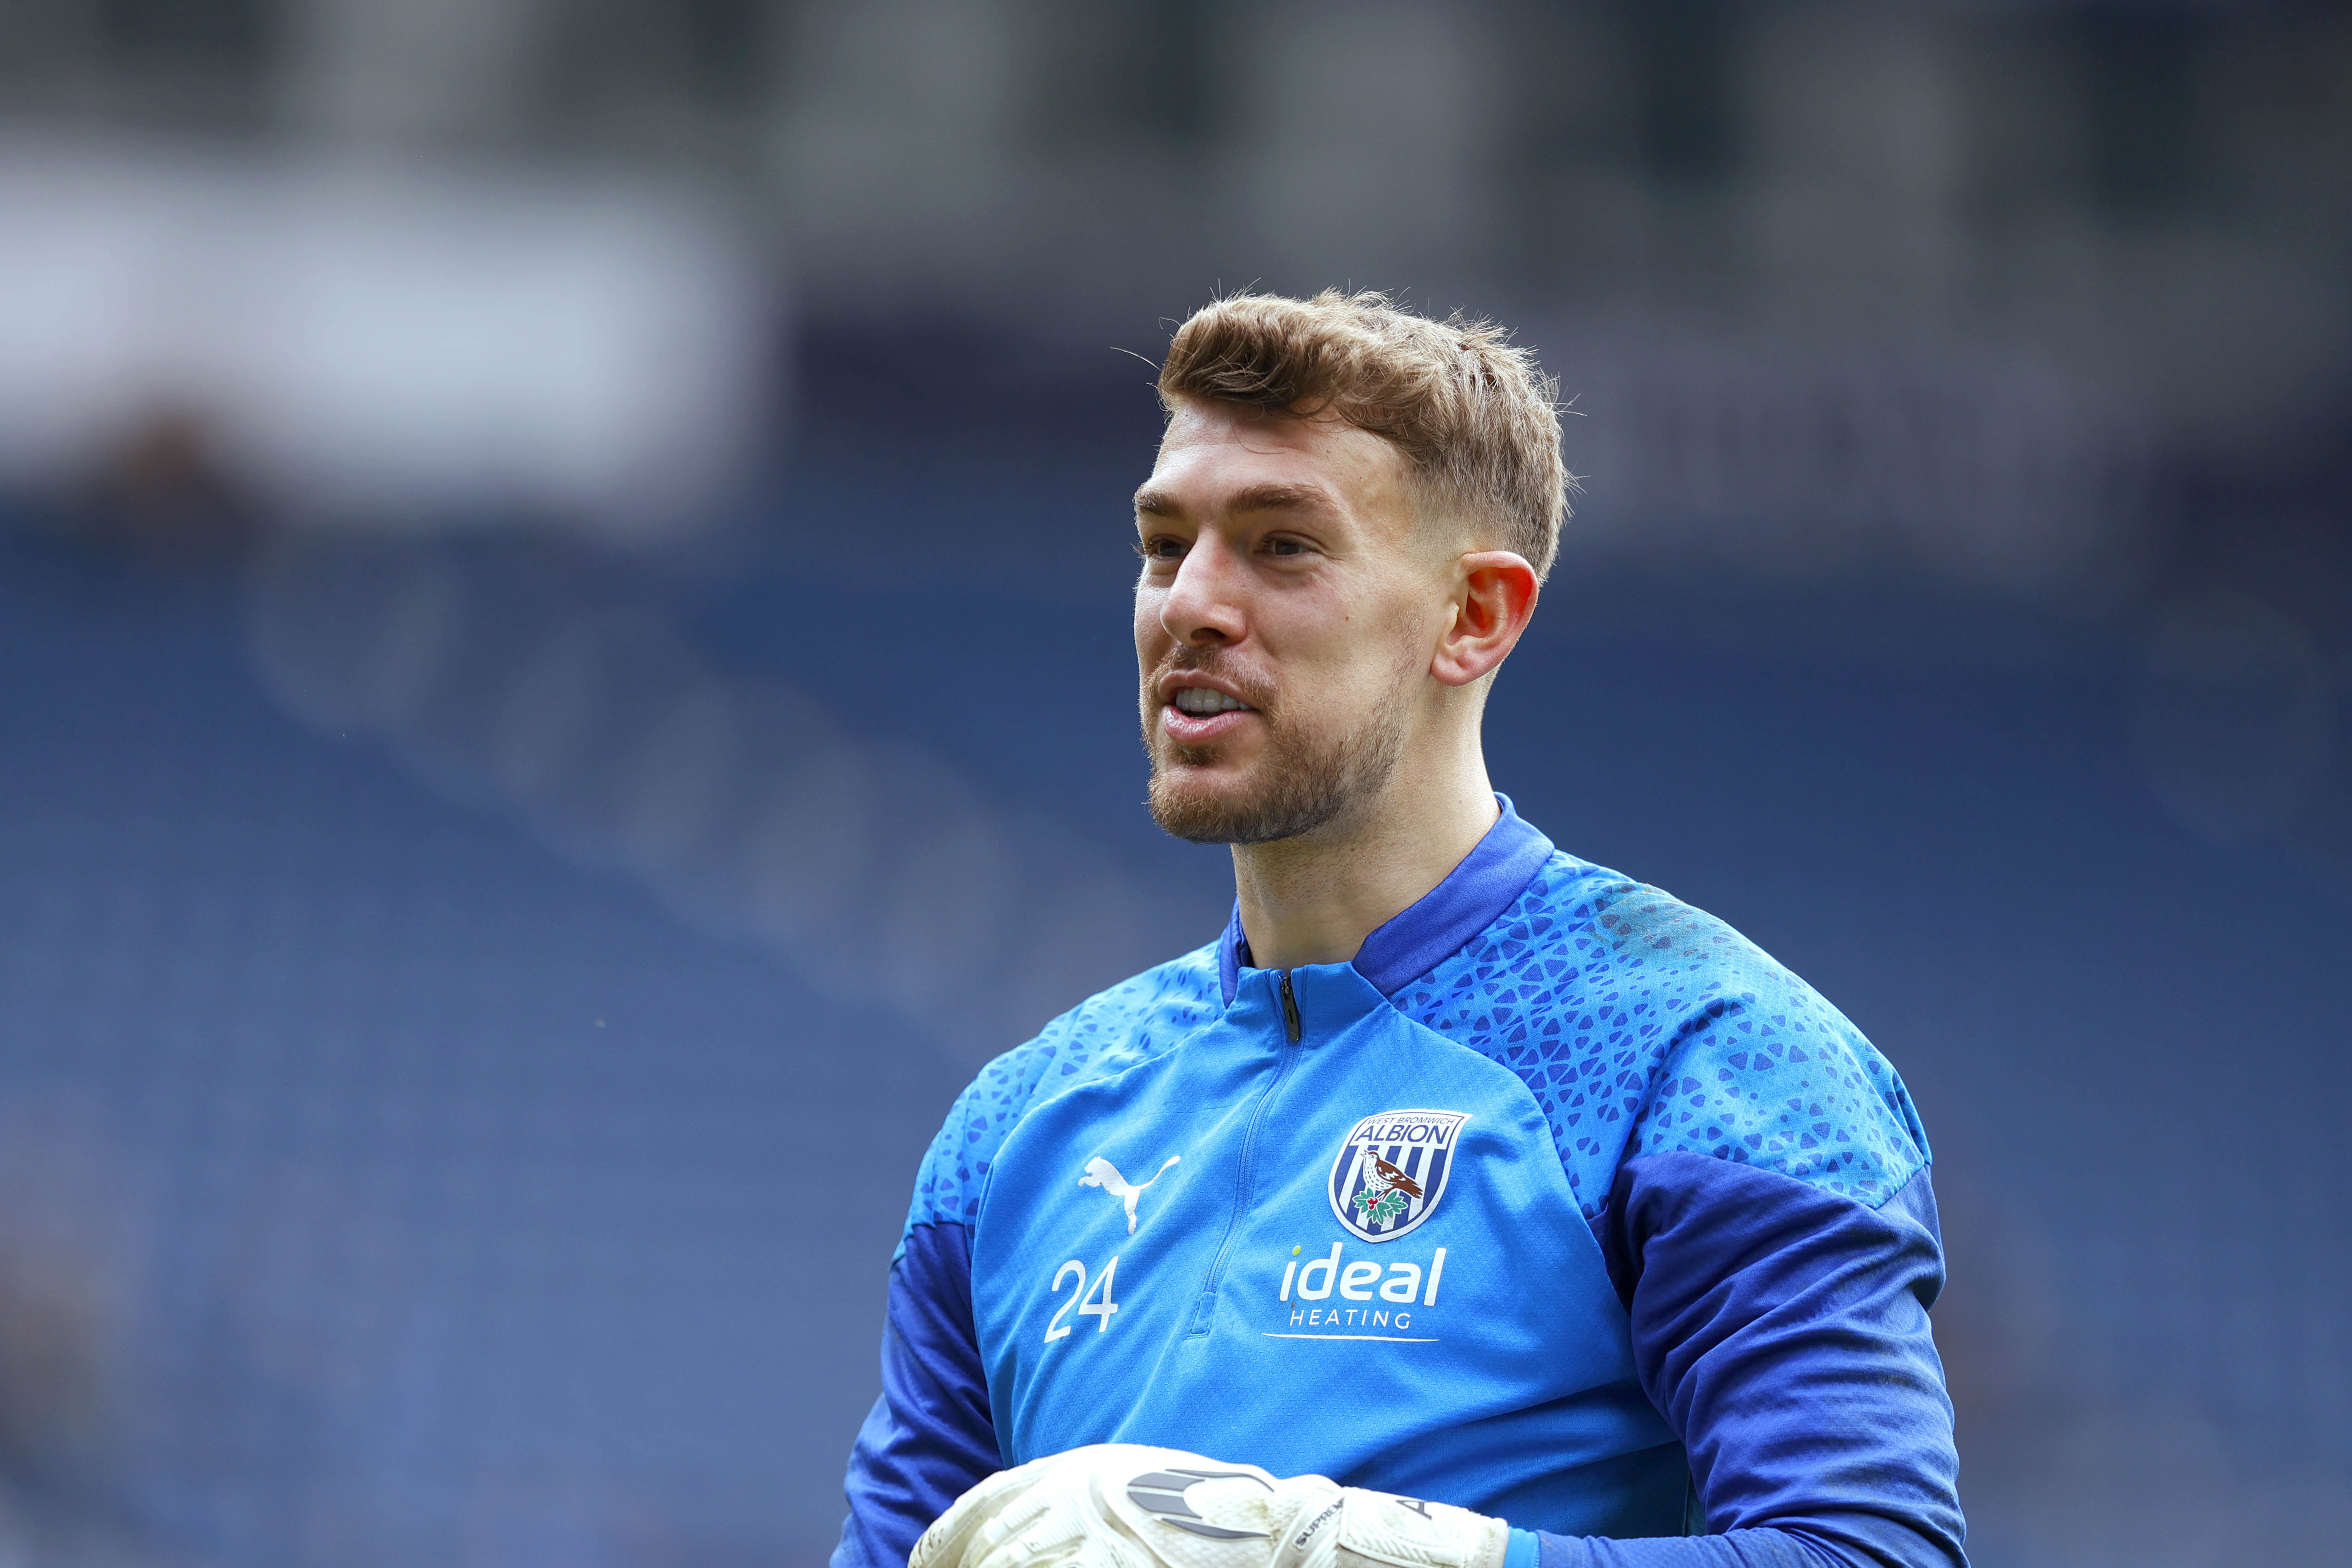 Alex Palmer smiling during a training session at The Hawthorns